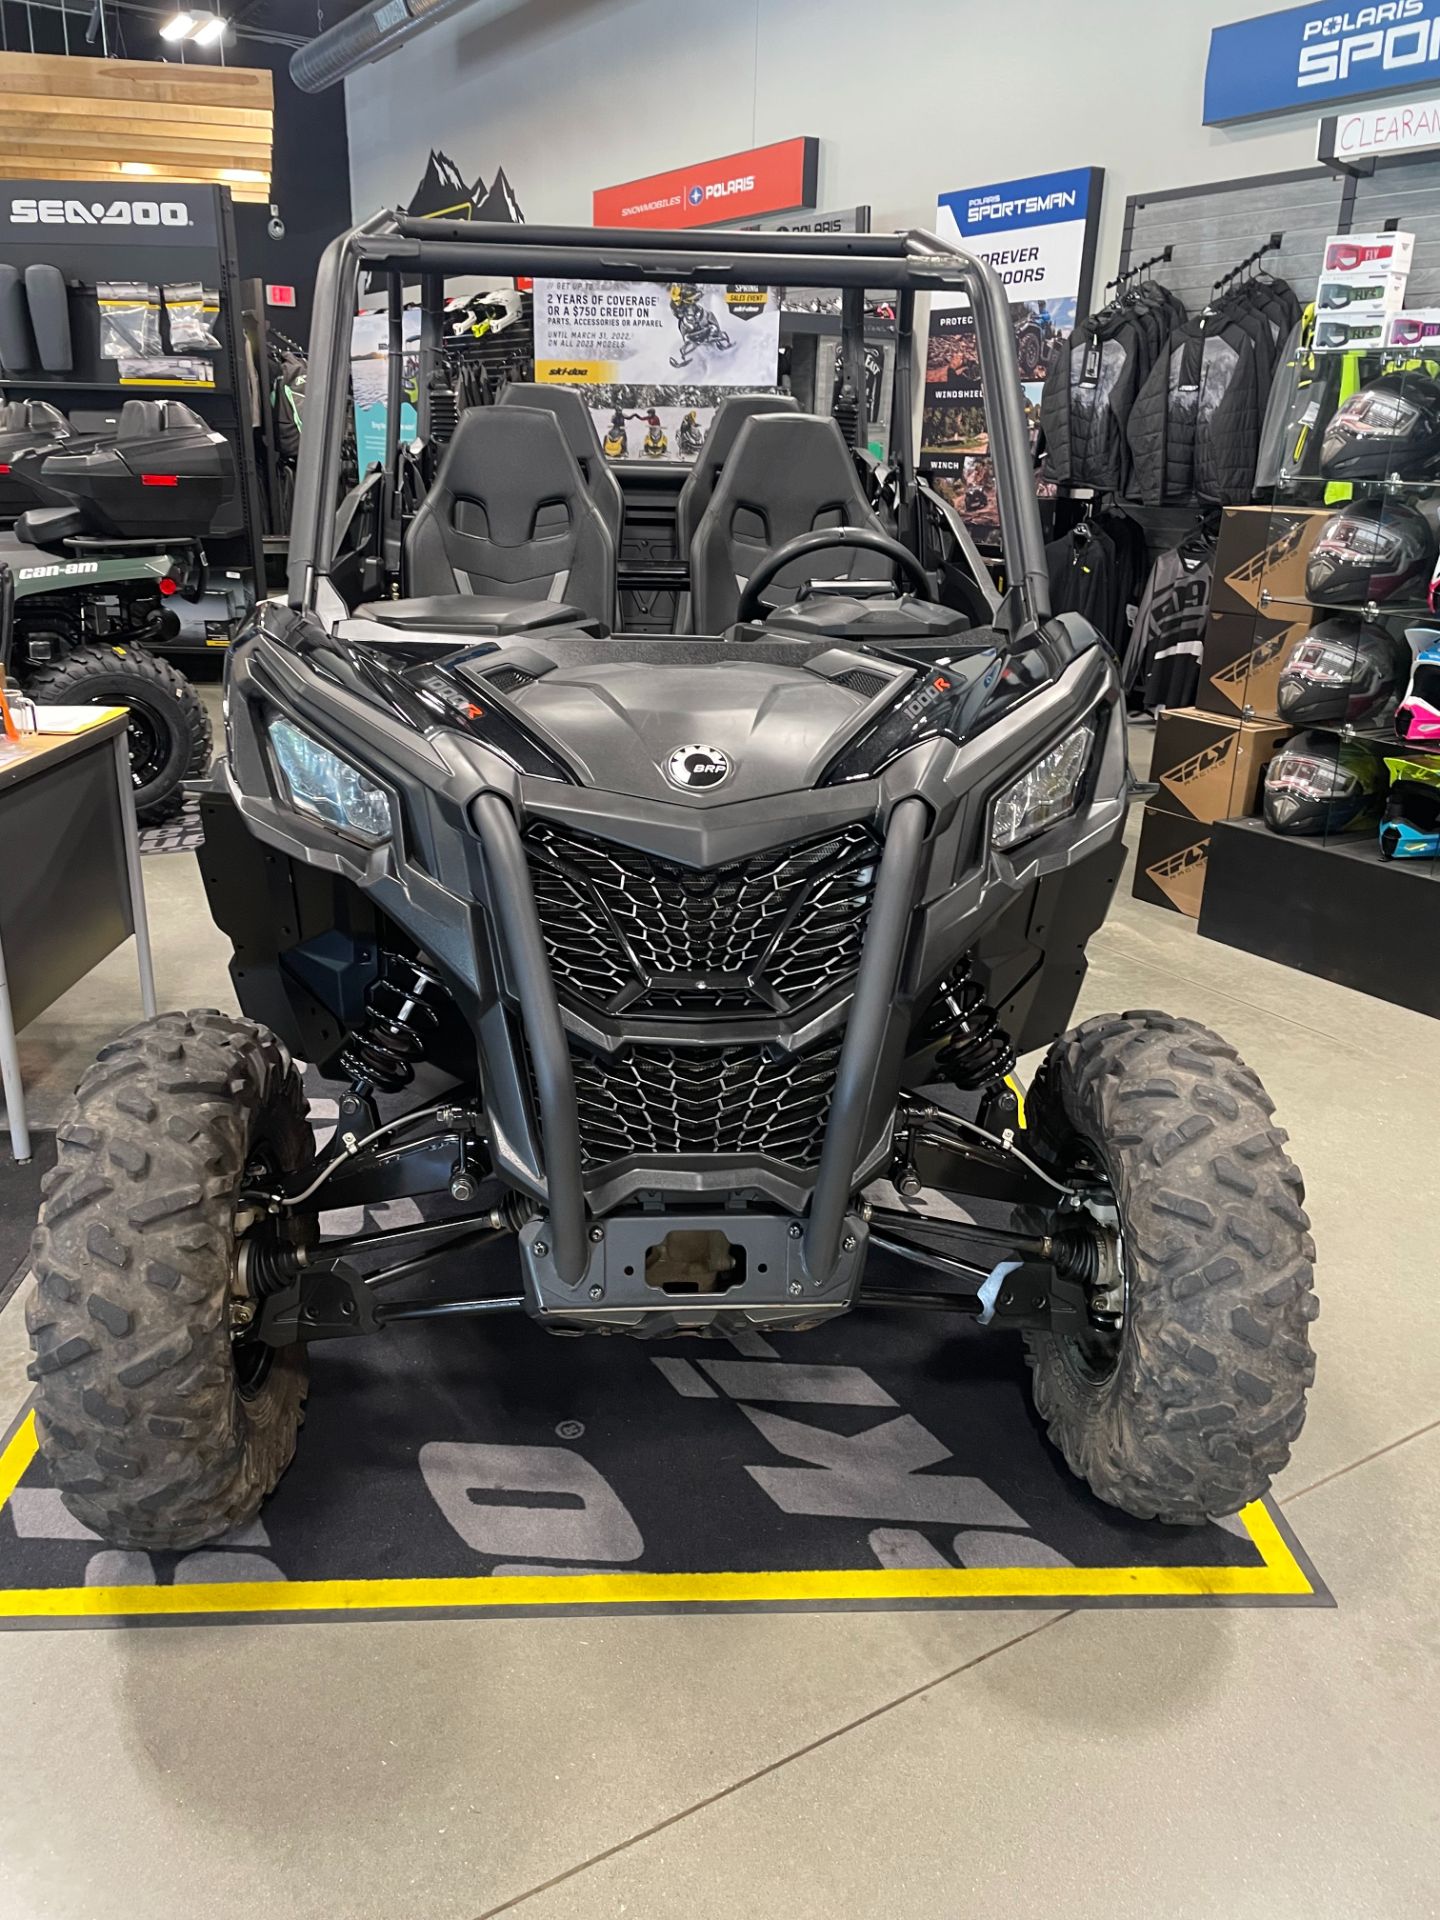 2021 Can-Am Maverick Sport Max DPS 1000R in Vernon, Connecticut - Photo 2